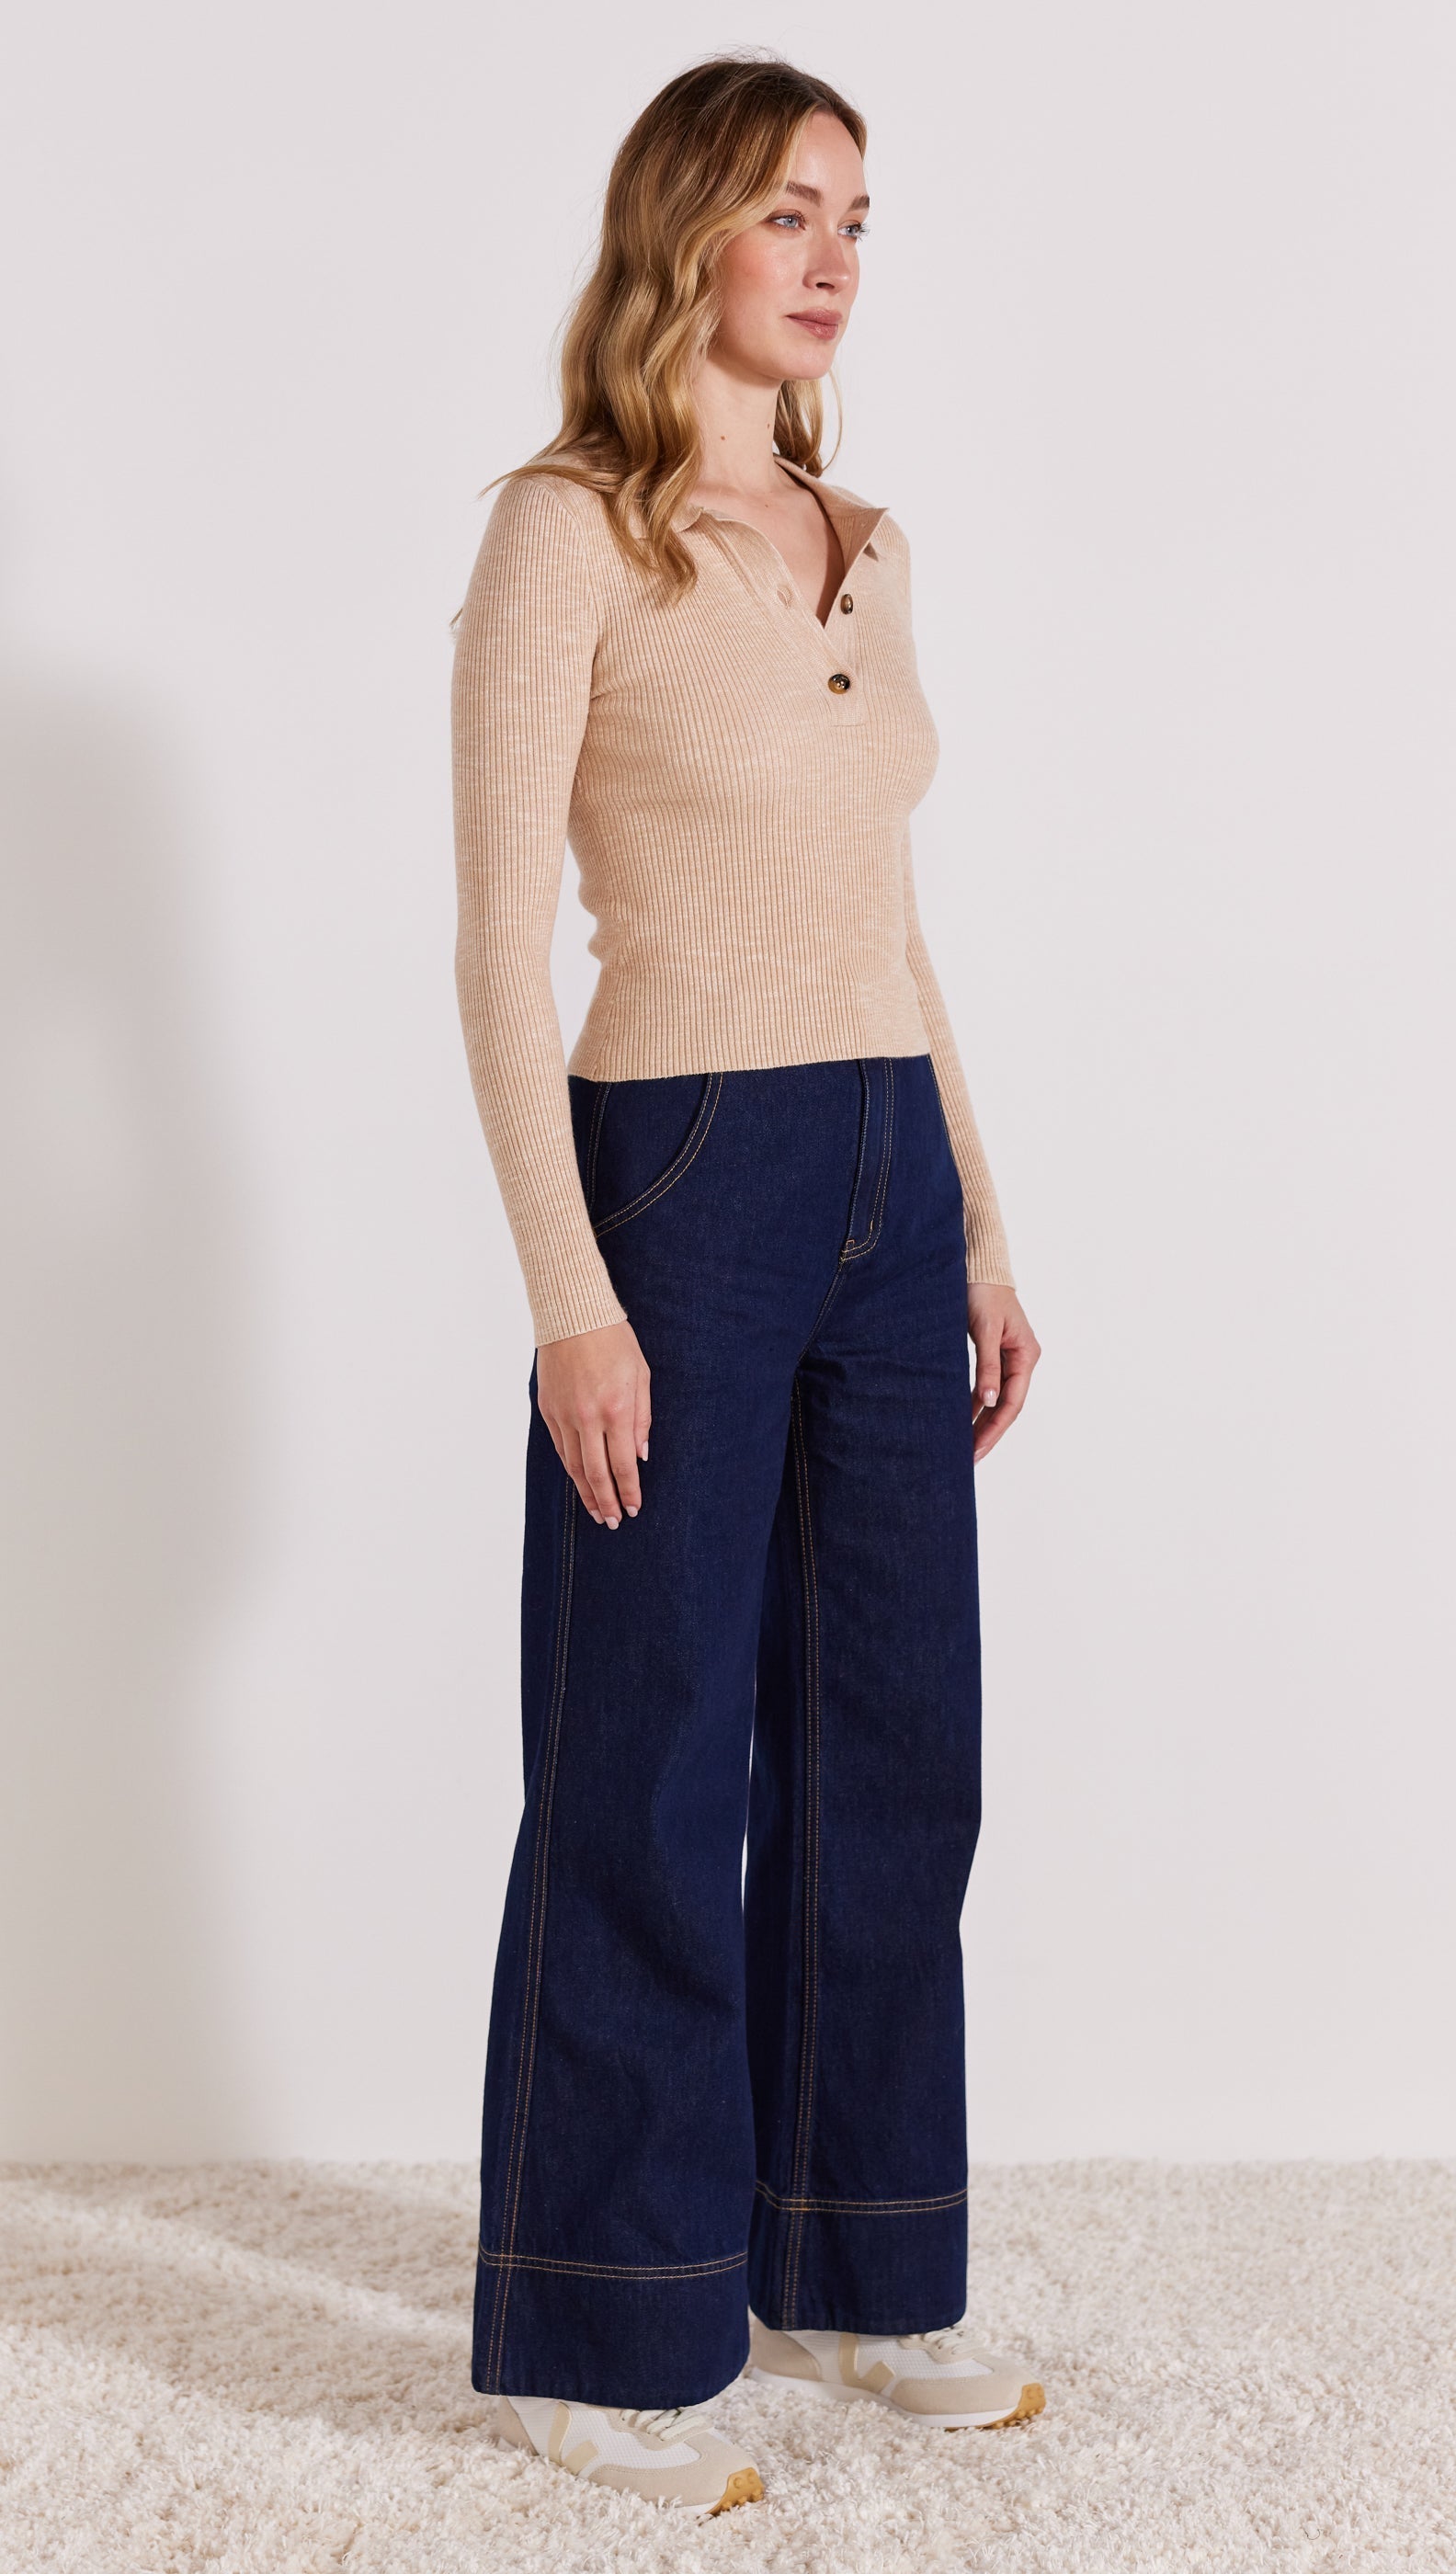 ALTA COLLARED KNIT TOP - Staple the Label Official Online